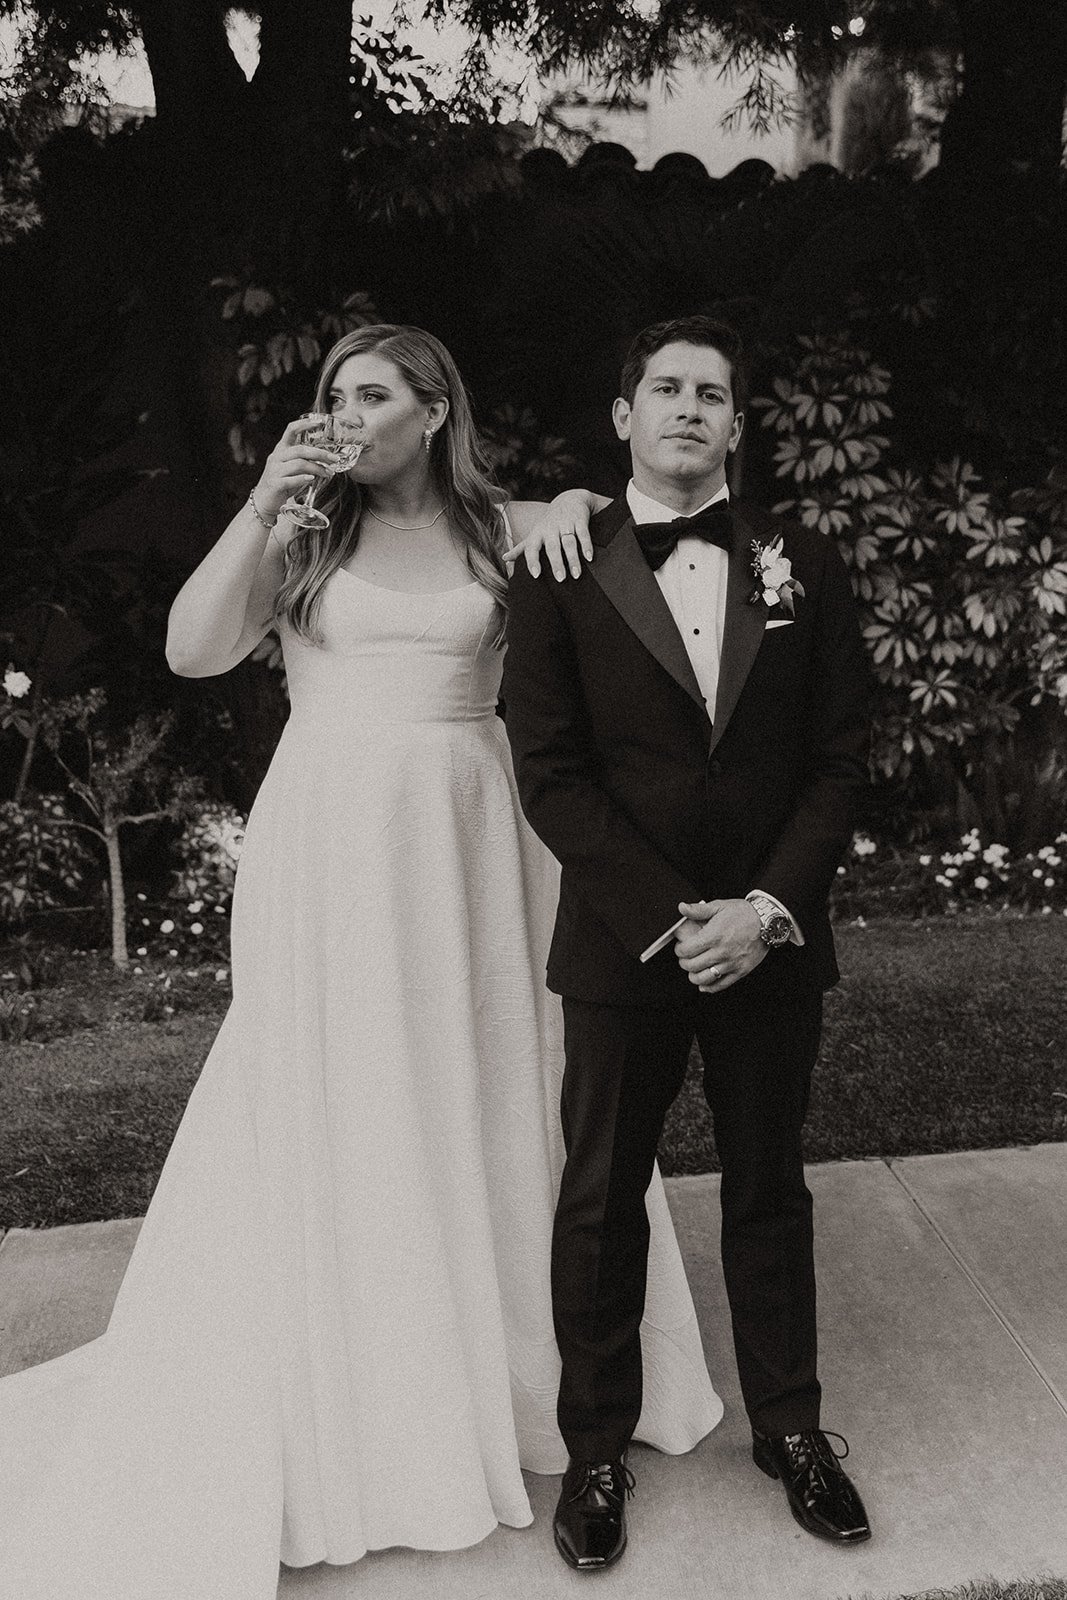 Black and white photo of bride and groom portraits for an outdoor wedding